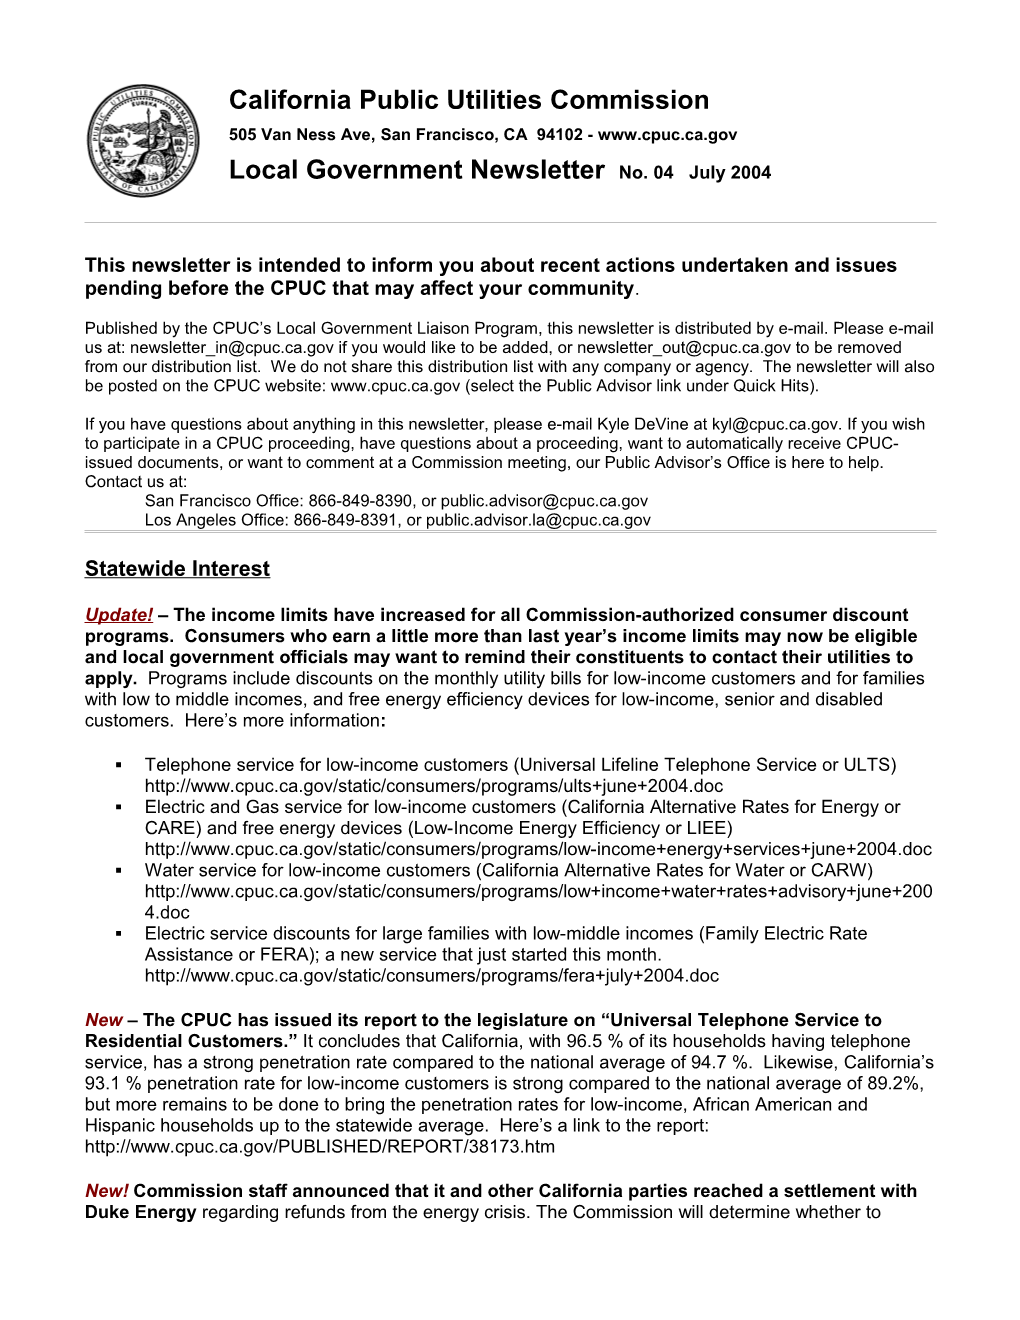 Published by the CPUC S Local Government Liaison Program, This Newsletter Is Distributed